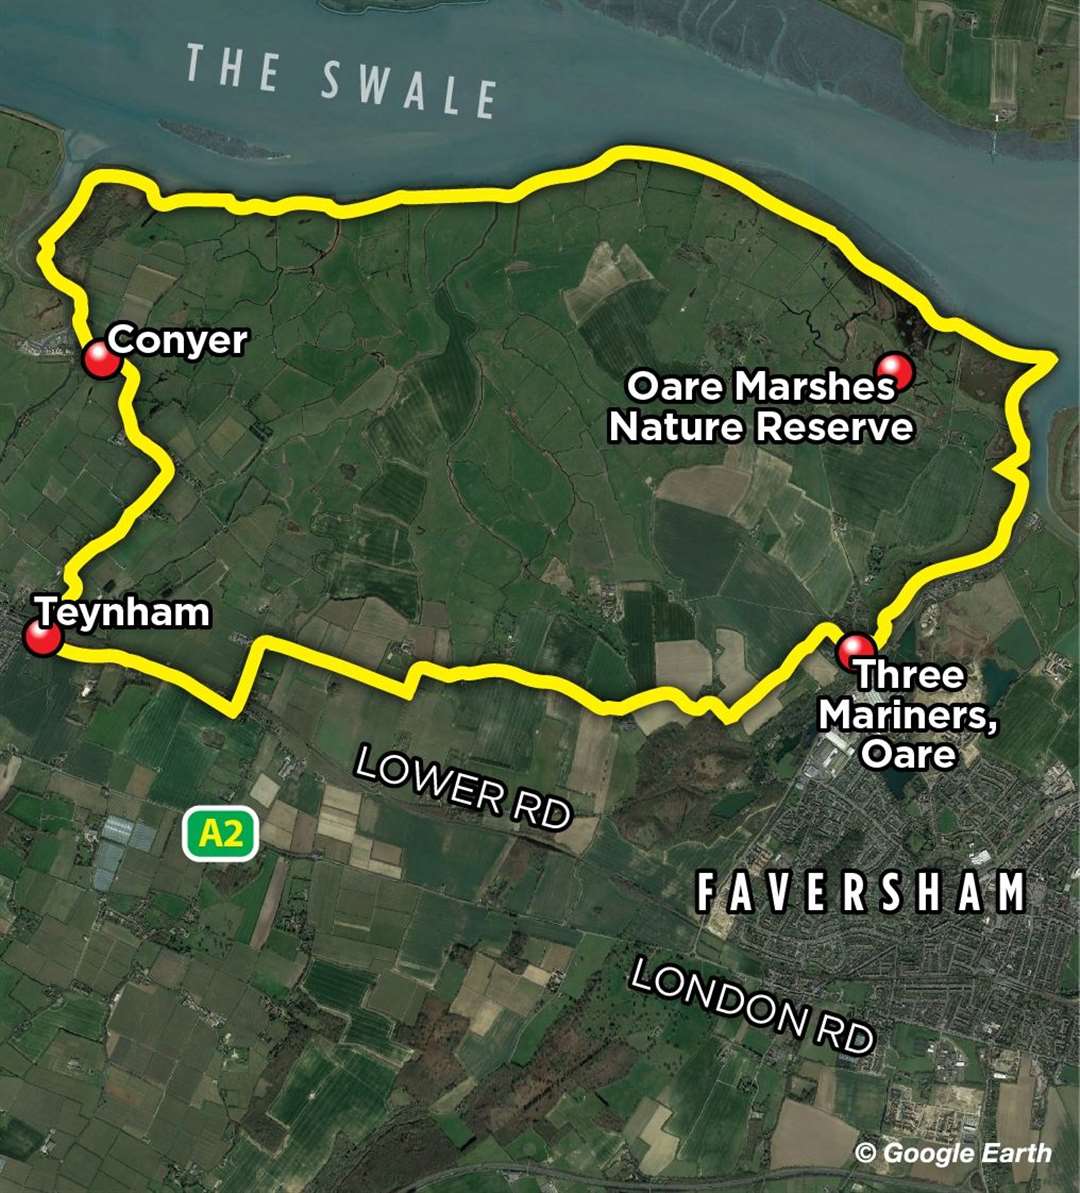 The route our man followed from Teynham station and along the edge of the Swale